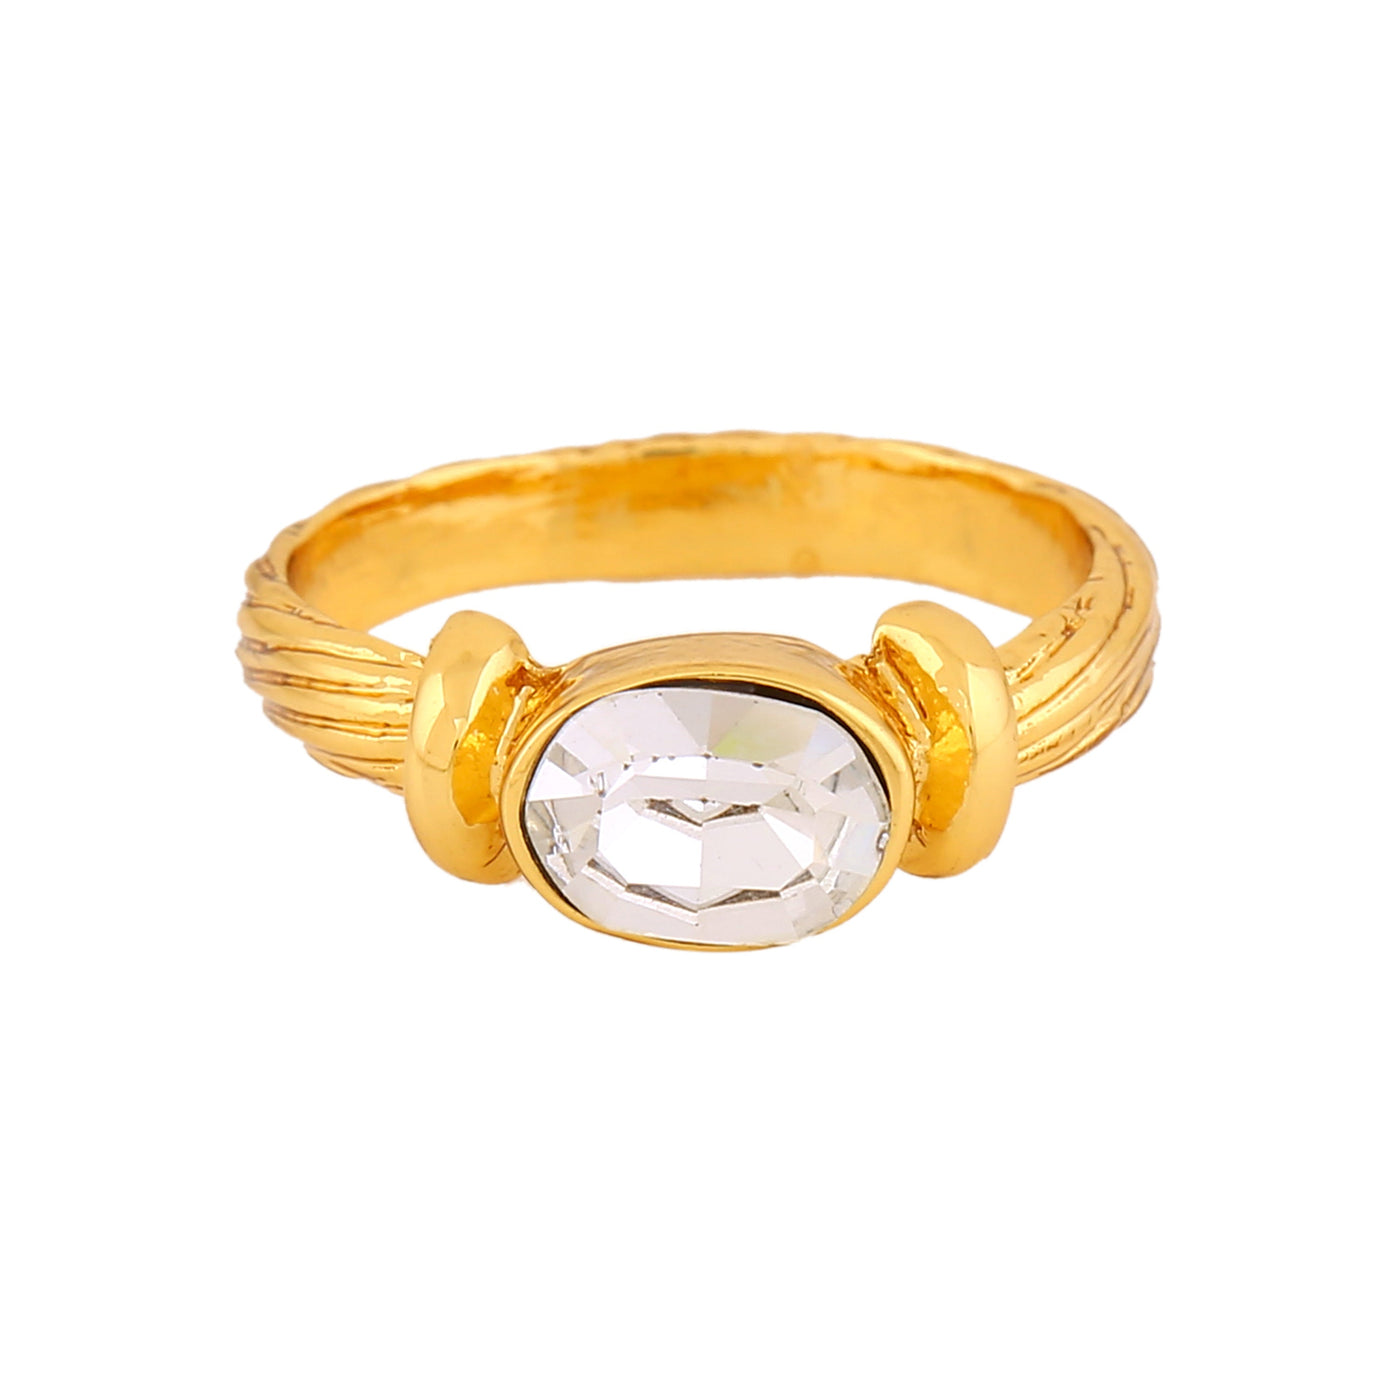 Estele Gold Plated Oval Shaped Finger Ring with Austrian Crystals for Women